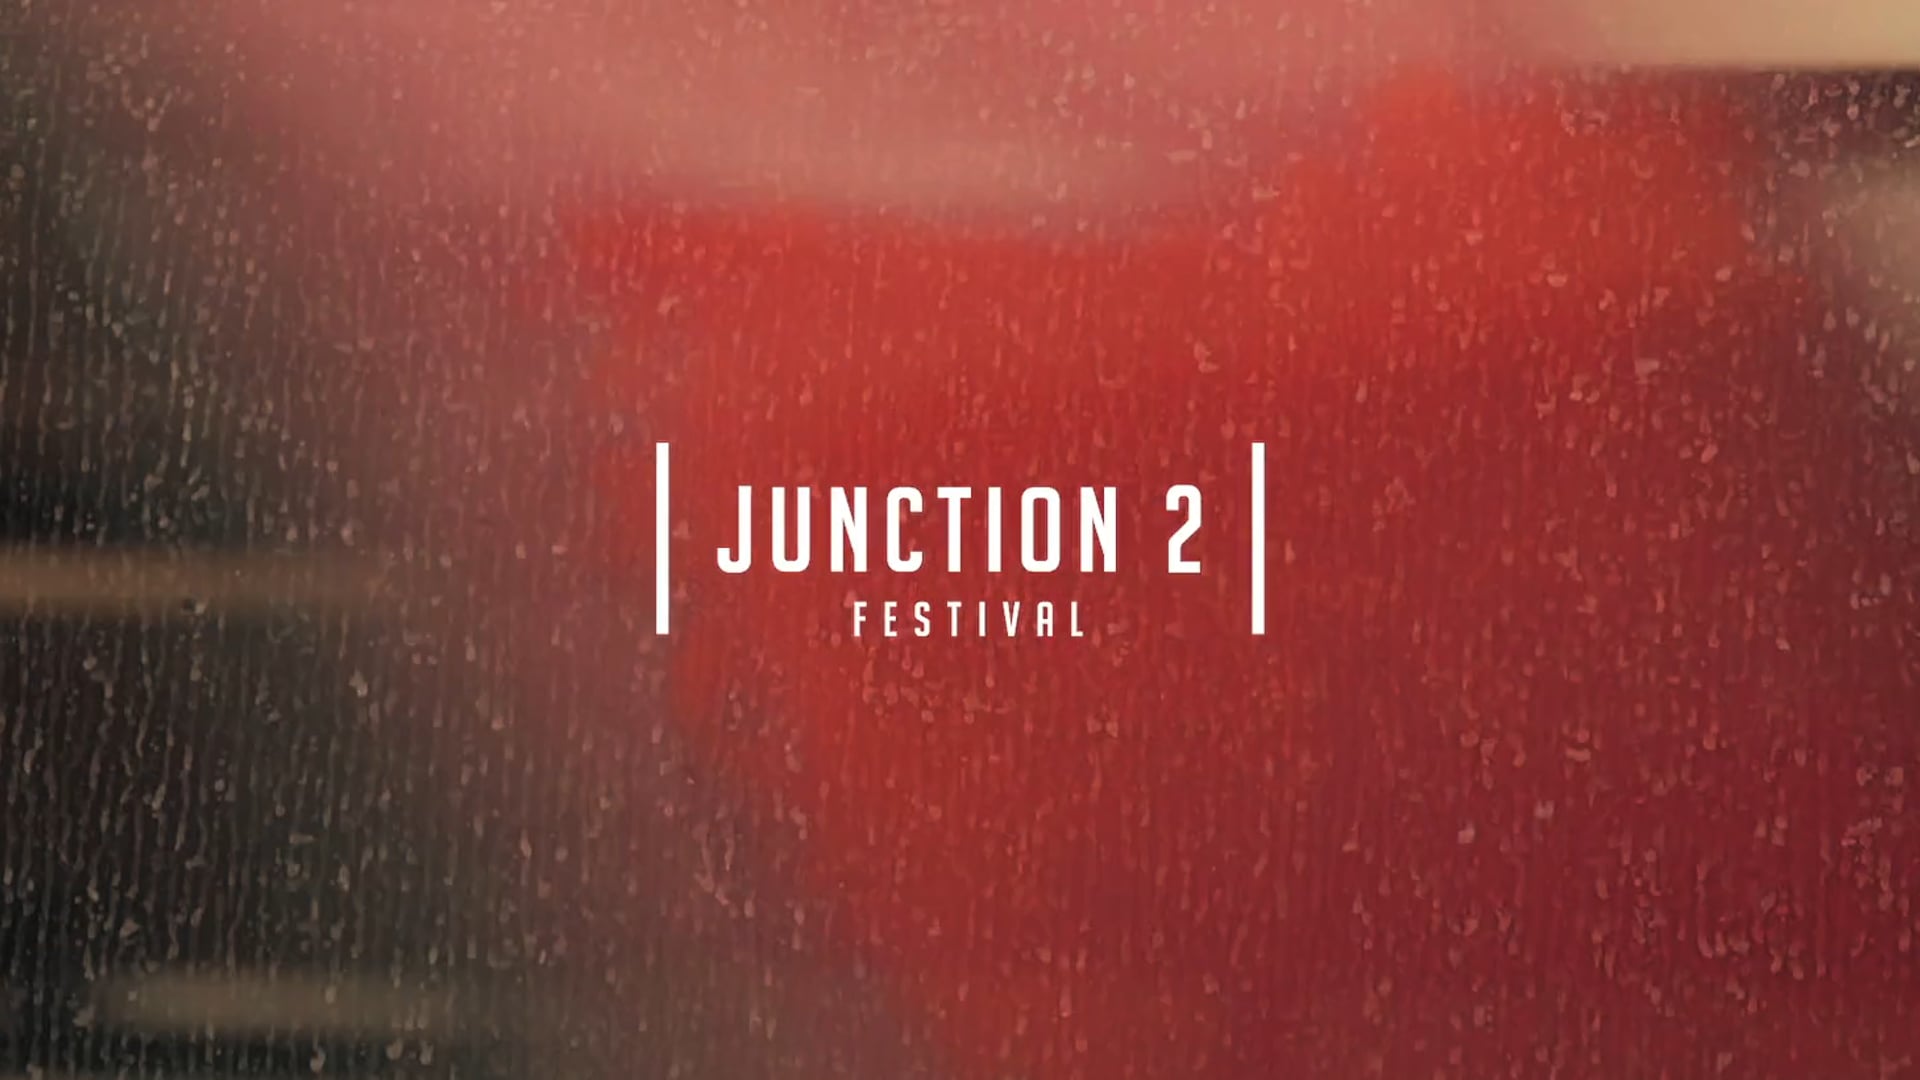 Drumcode At Juction 2 (Oficial Aftermovie)